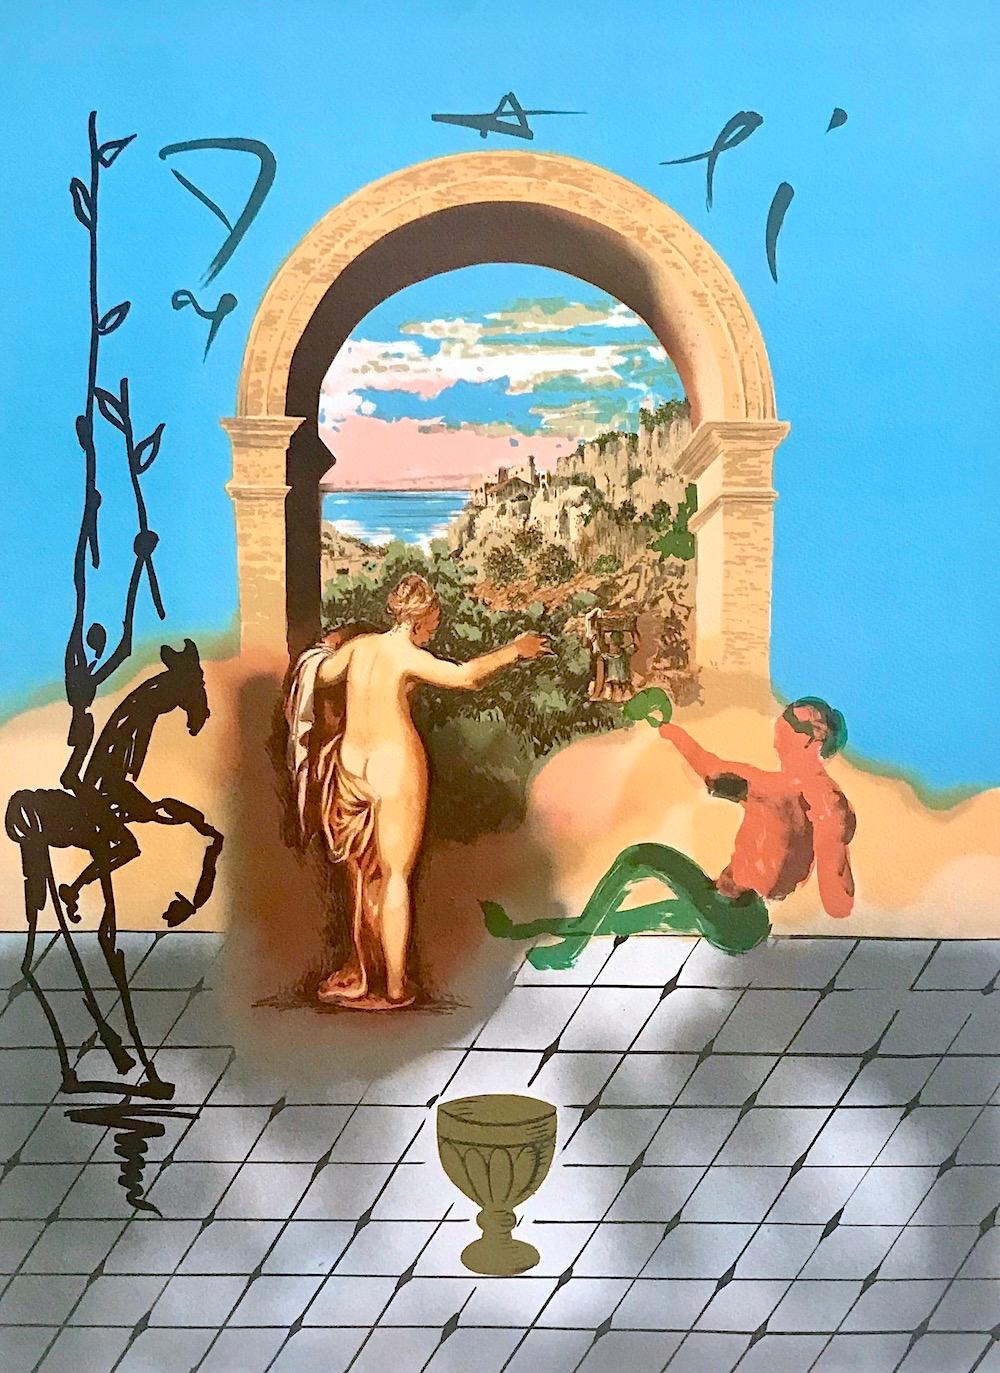 Gateway To The New World, Dali Discovers America Portfolio, Signed Lithograph - Print by Salvador Dalí